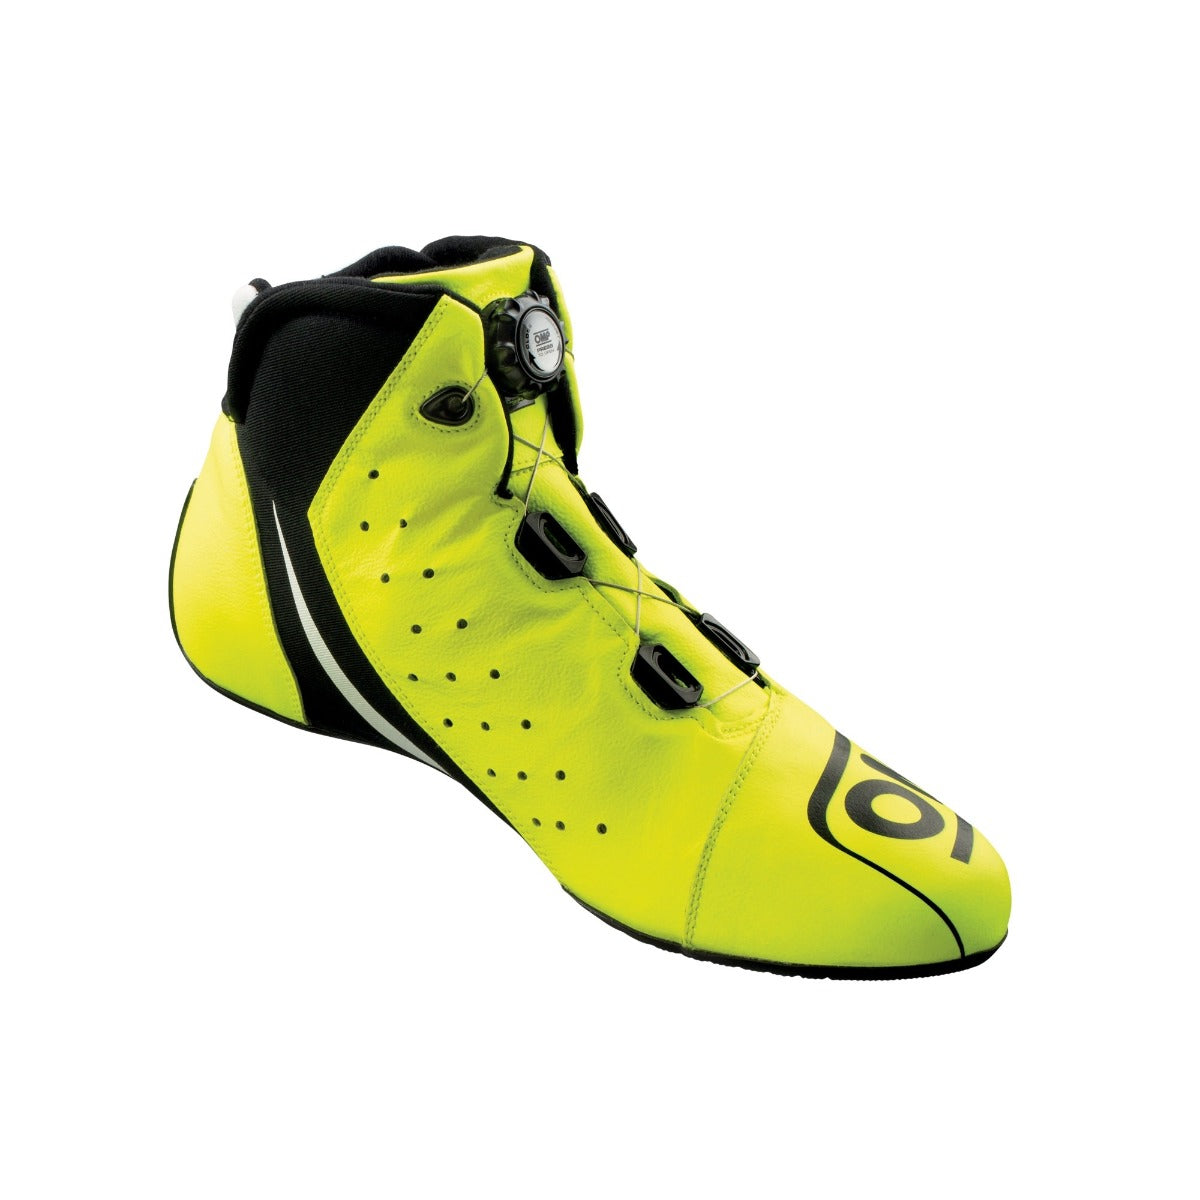 OMP One Evo X R Nomex Race Shoe in bright yellow